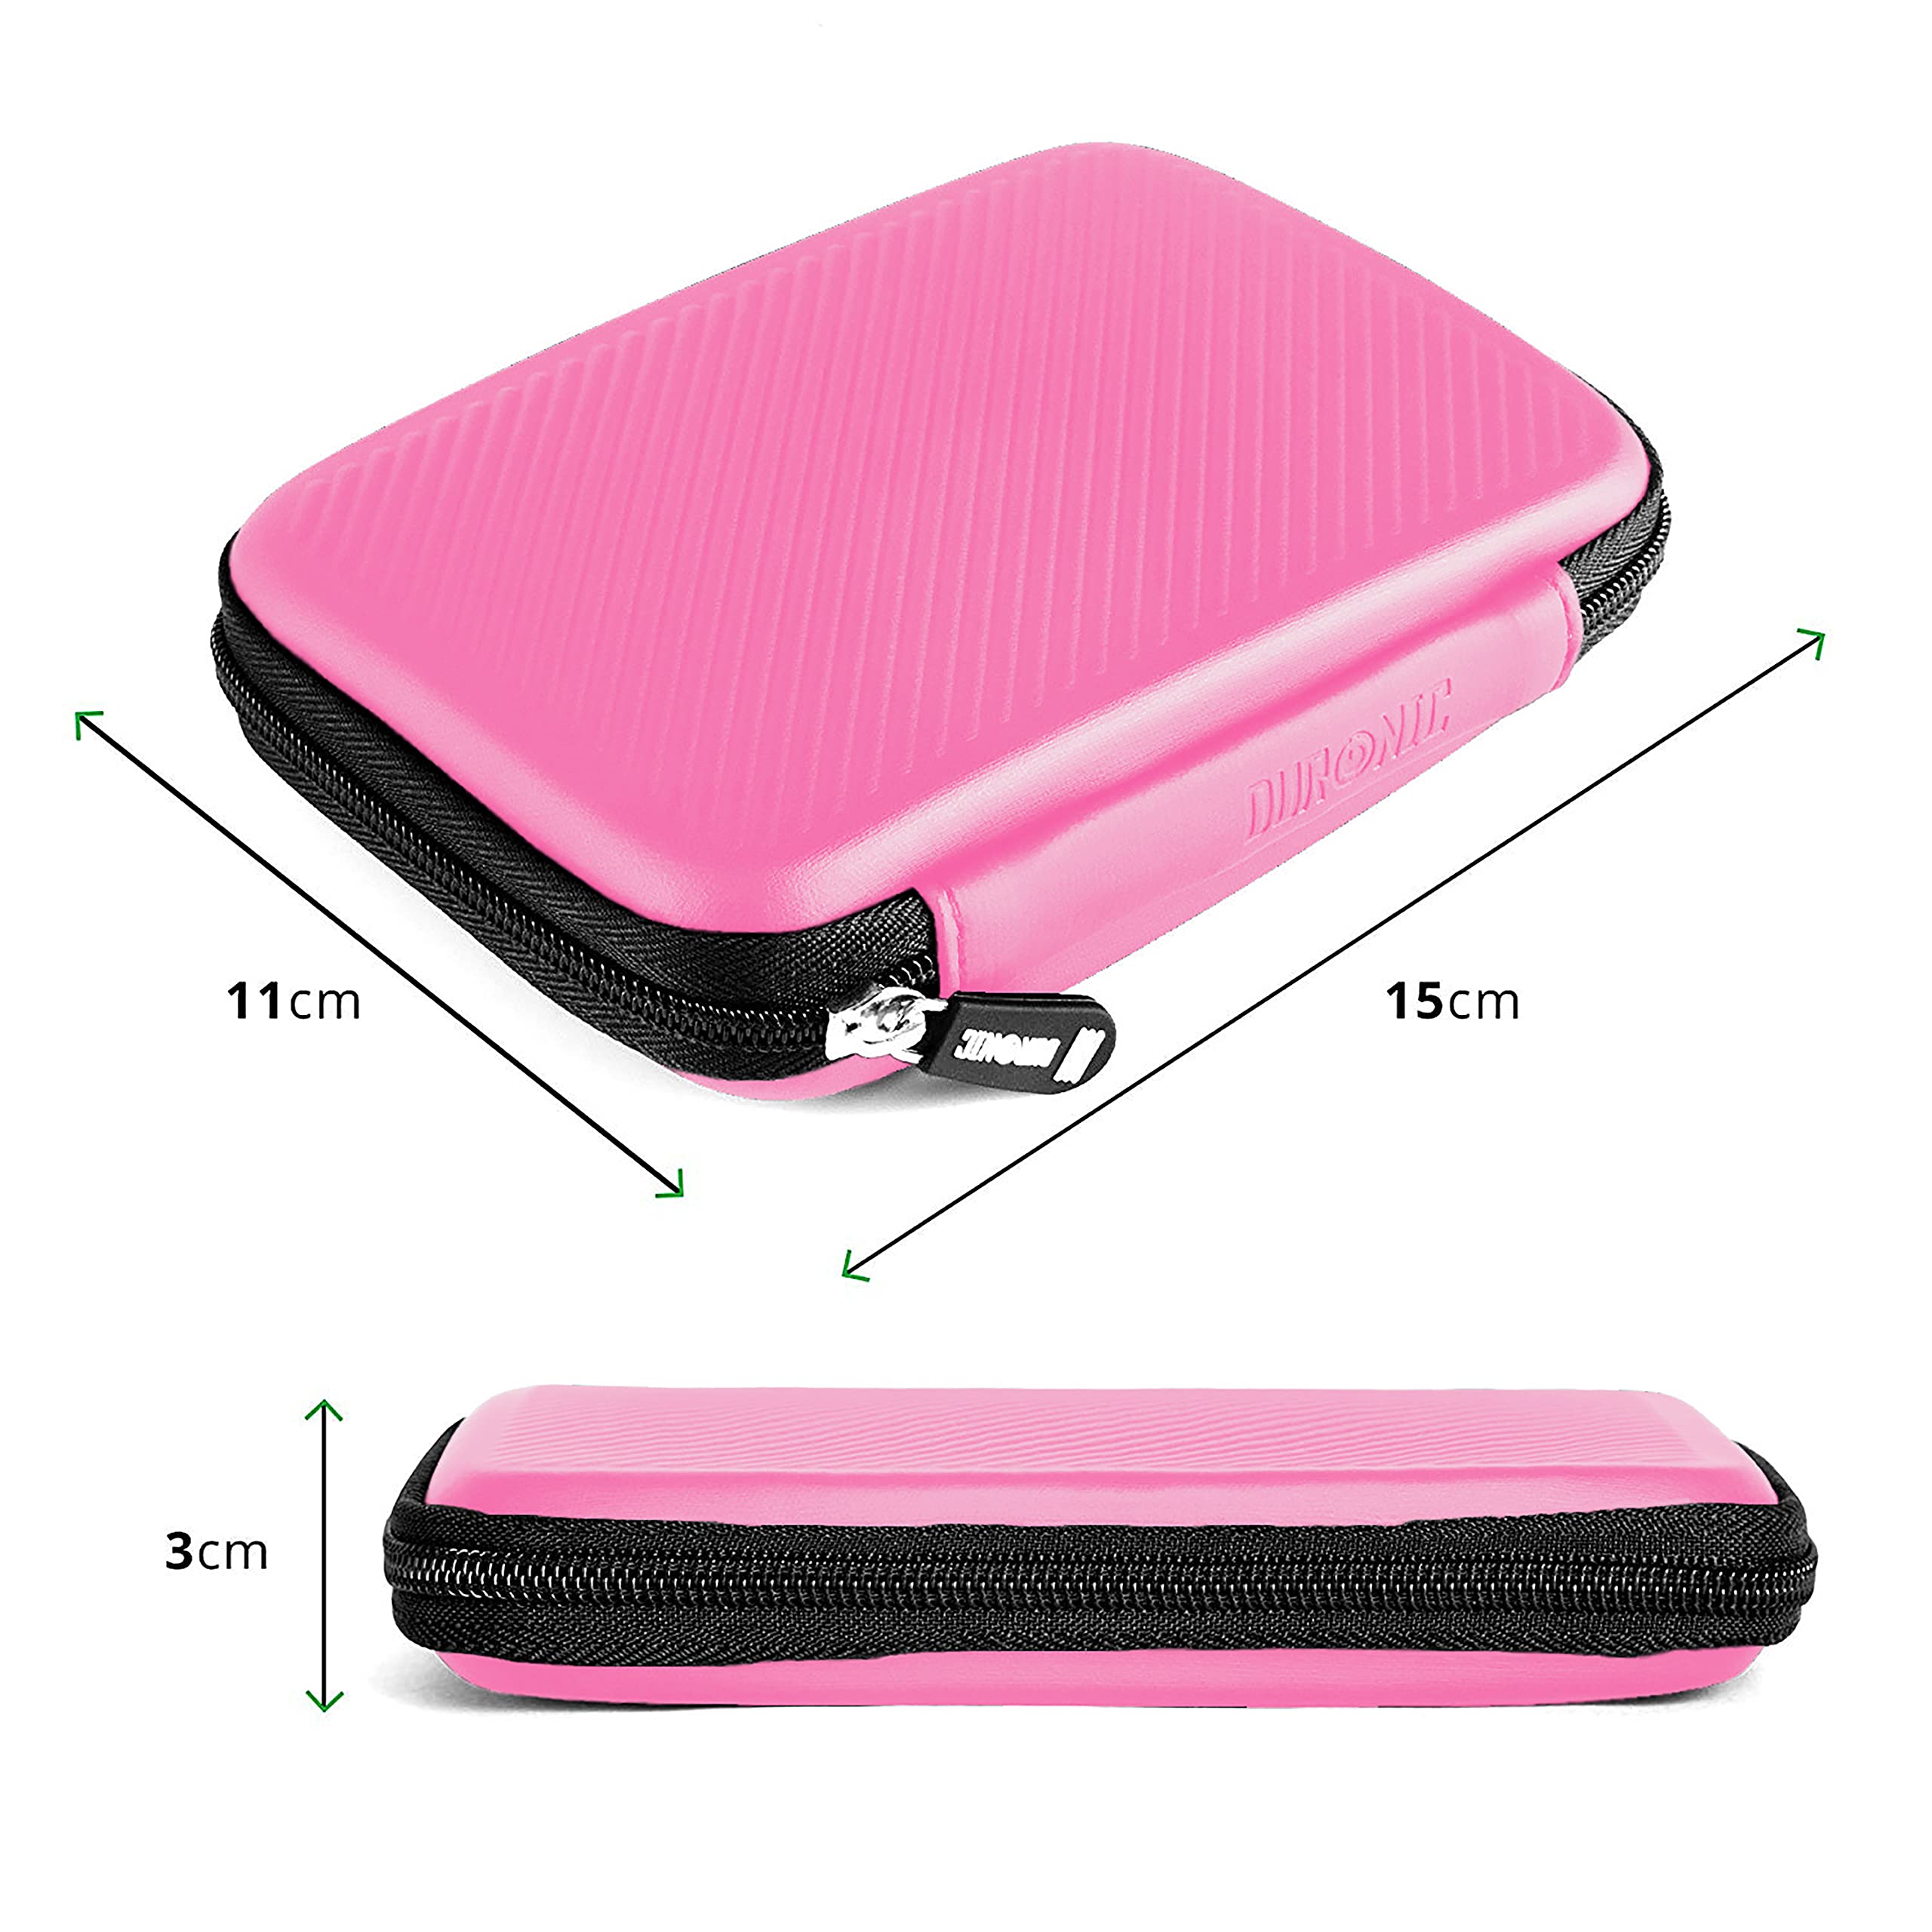 Duronic Hard Drive Case HDC2 /PK, PINK, Portable EVA Storage Pouch for External Hardrive & Cables, Lightweight & Protective, Suitable for WE/Western, Toshiba, Buffalo, Hitachi, Seagate, Samsung